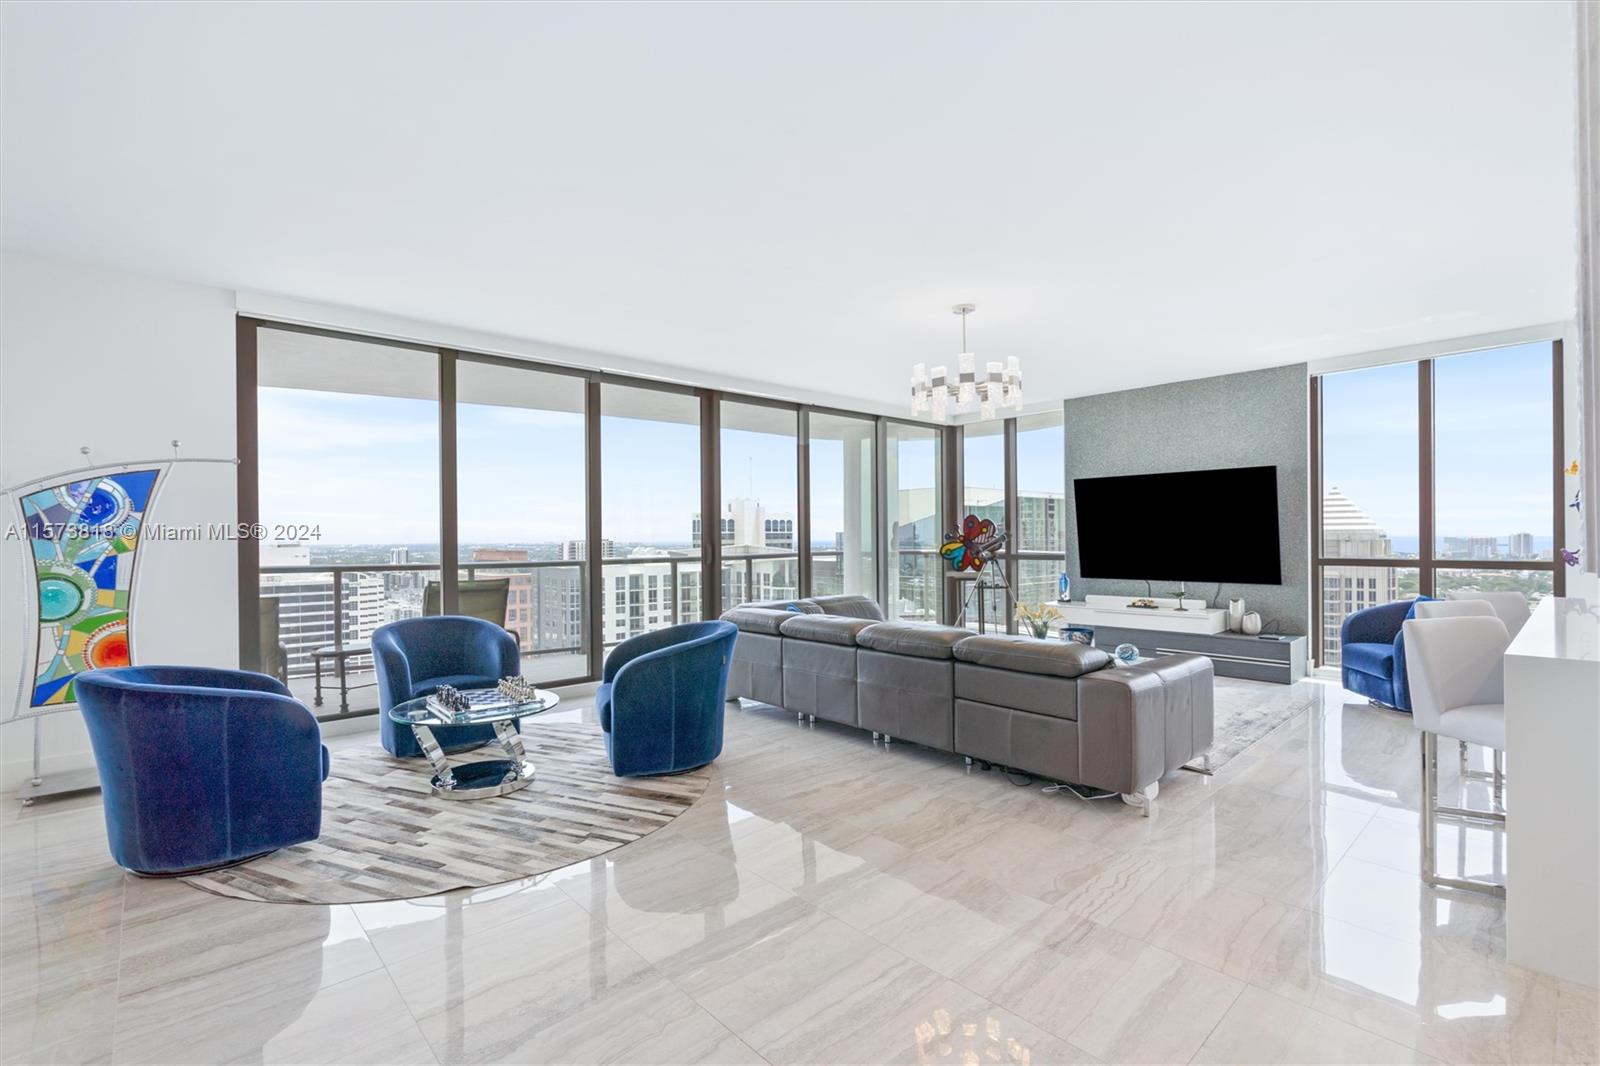 Las Olas Luxury Living at its finest! Unit comes with 3 parking spots!! Relax on a huge wrap around covered terrace, enjoying stunning sunsets over fantastic views of the city, river, and ocean. Floor to ceiling impact windows.